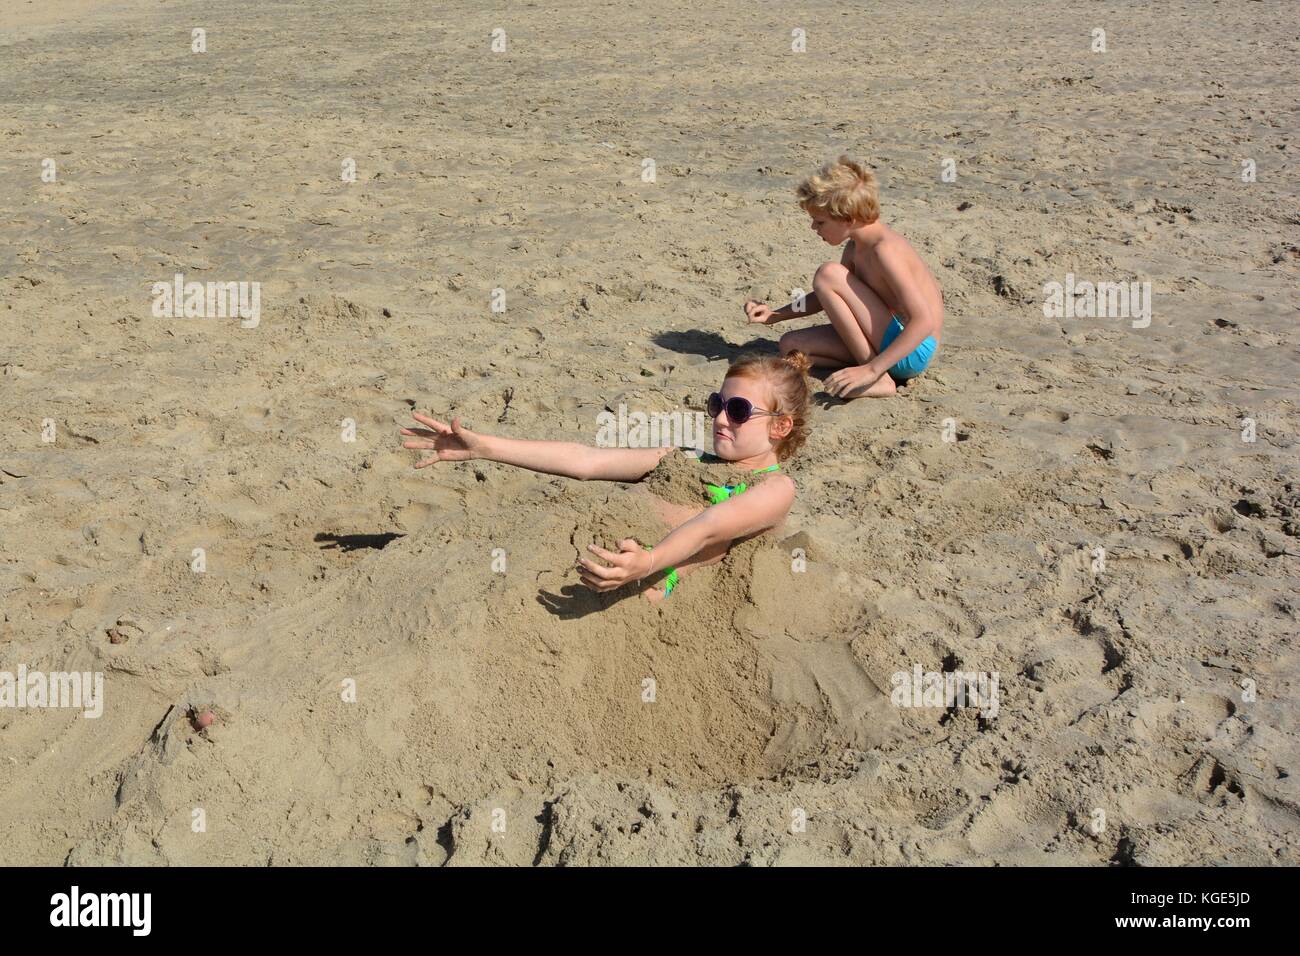 To get up in sand dug girl tried, boy sits besides Stock Photo